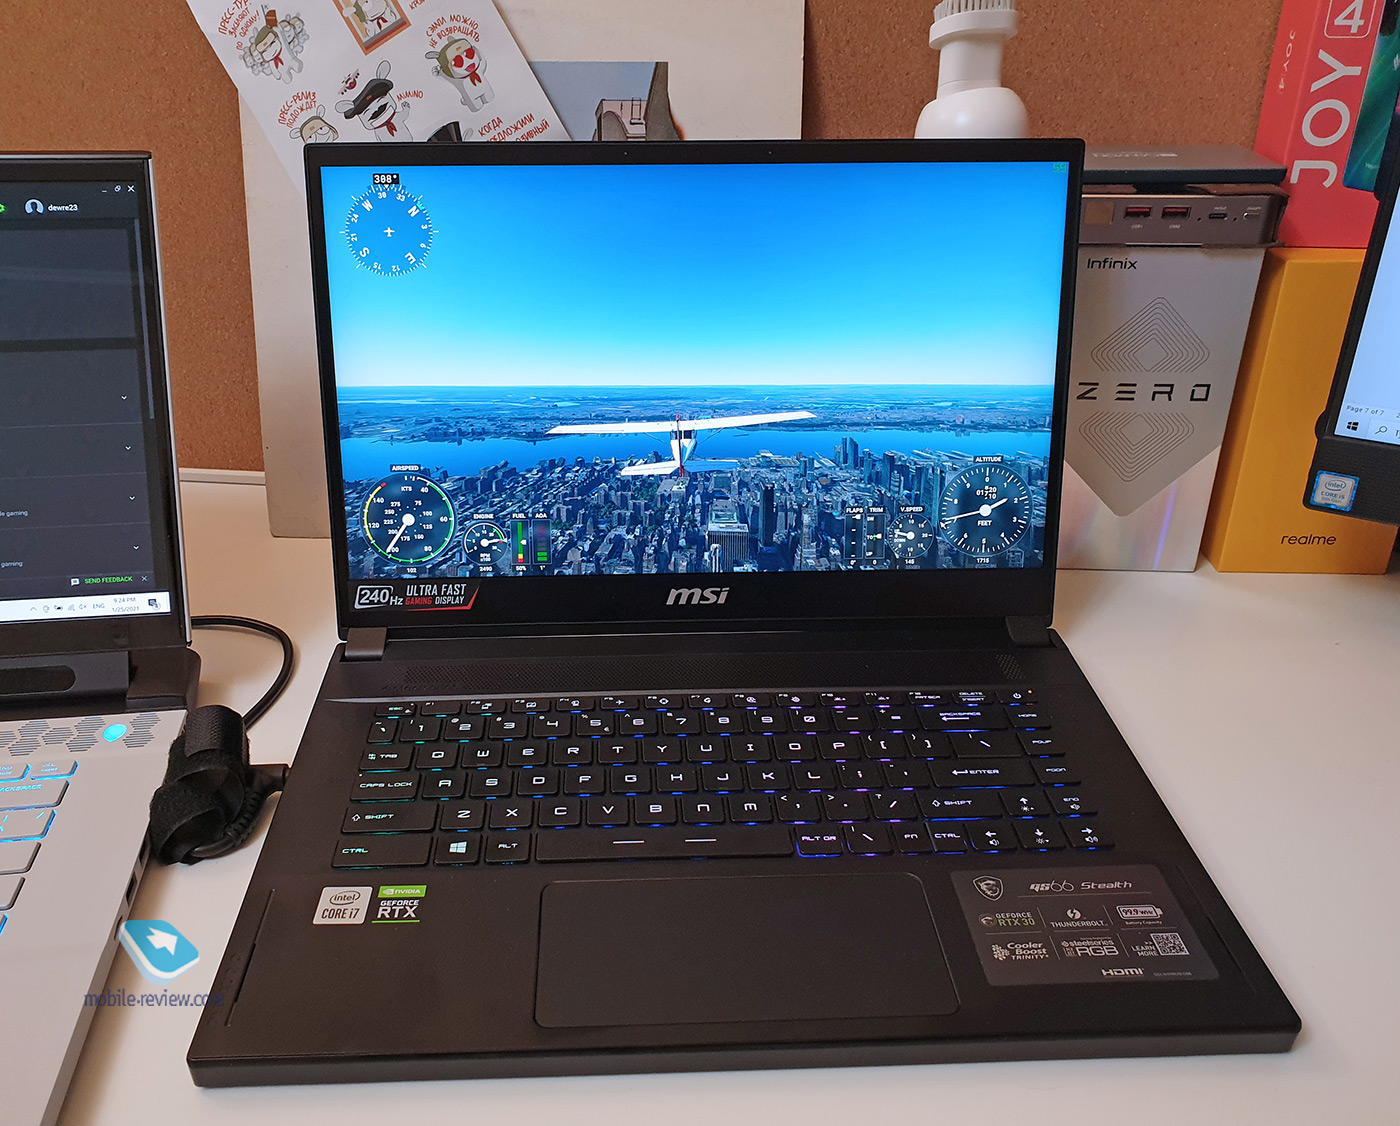 Test: what can the Nvidia GeForce RTX 3080 do in a laptop?